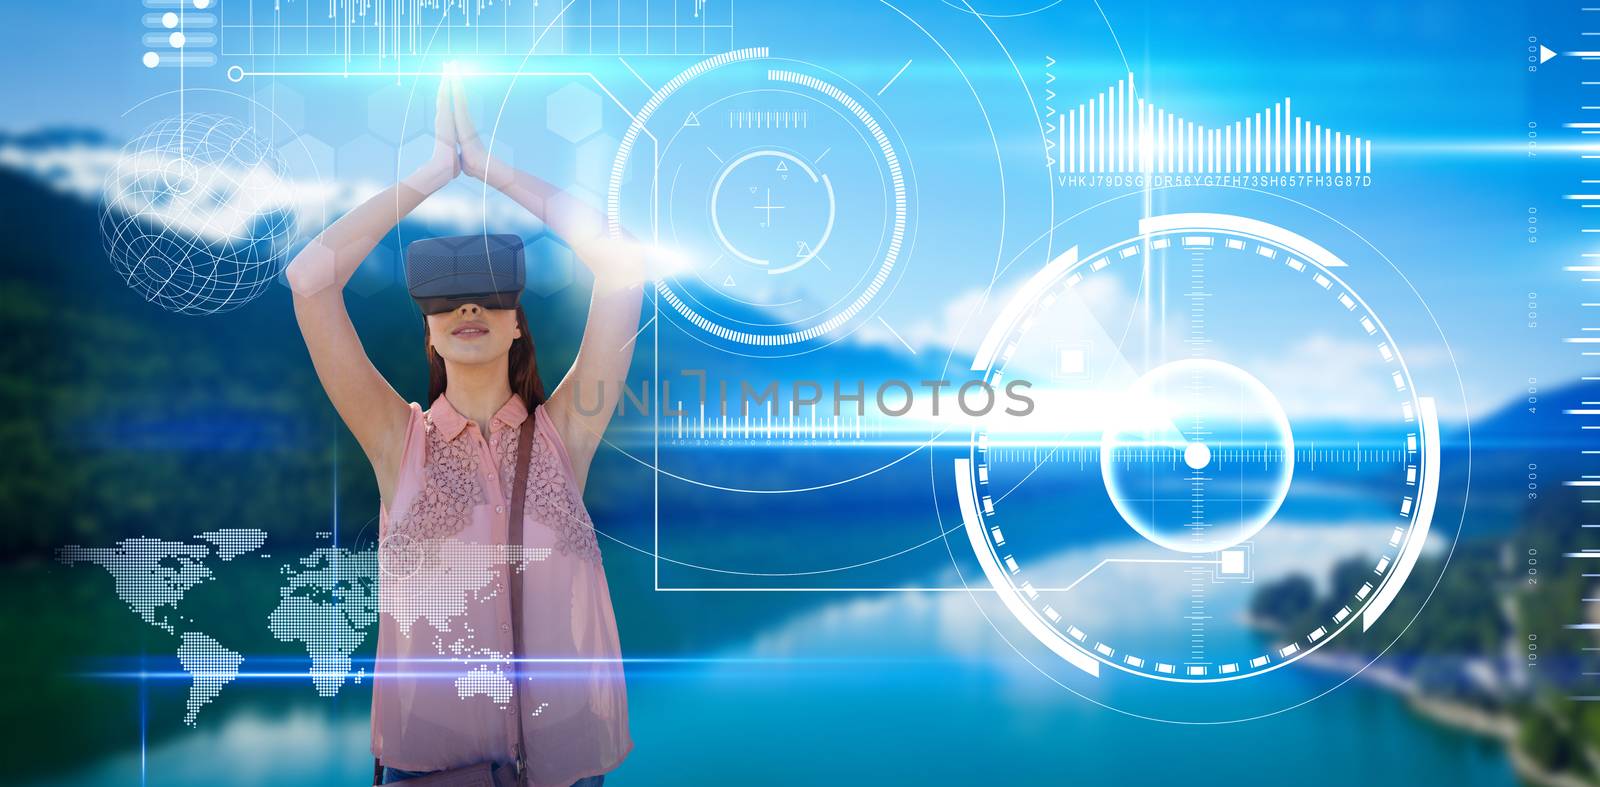 Composite image of young woman with arms raised looking through virtual reality simulator by Wavebreakmedia